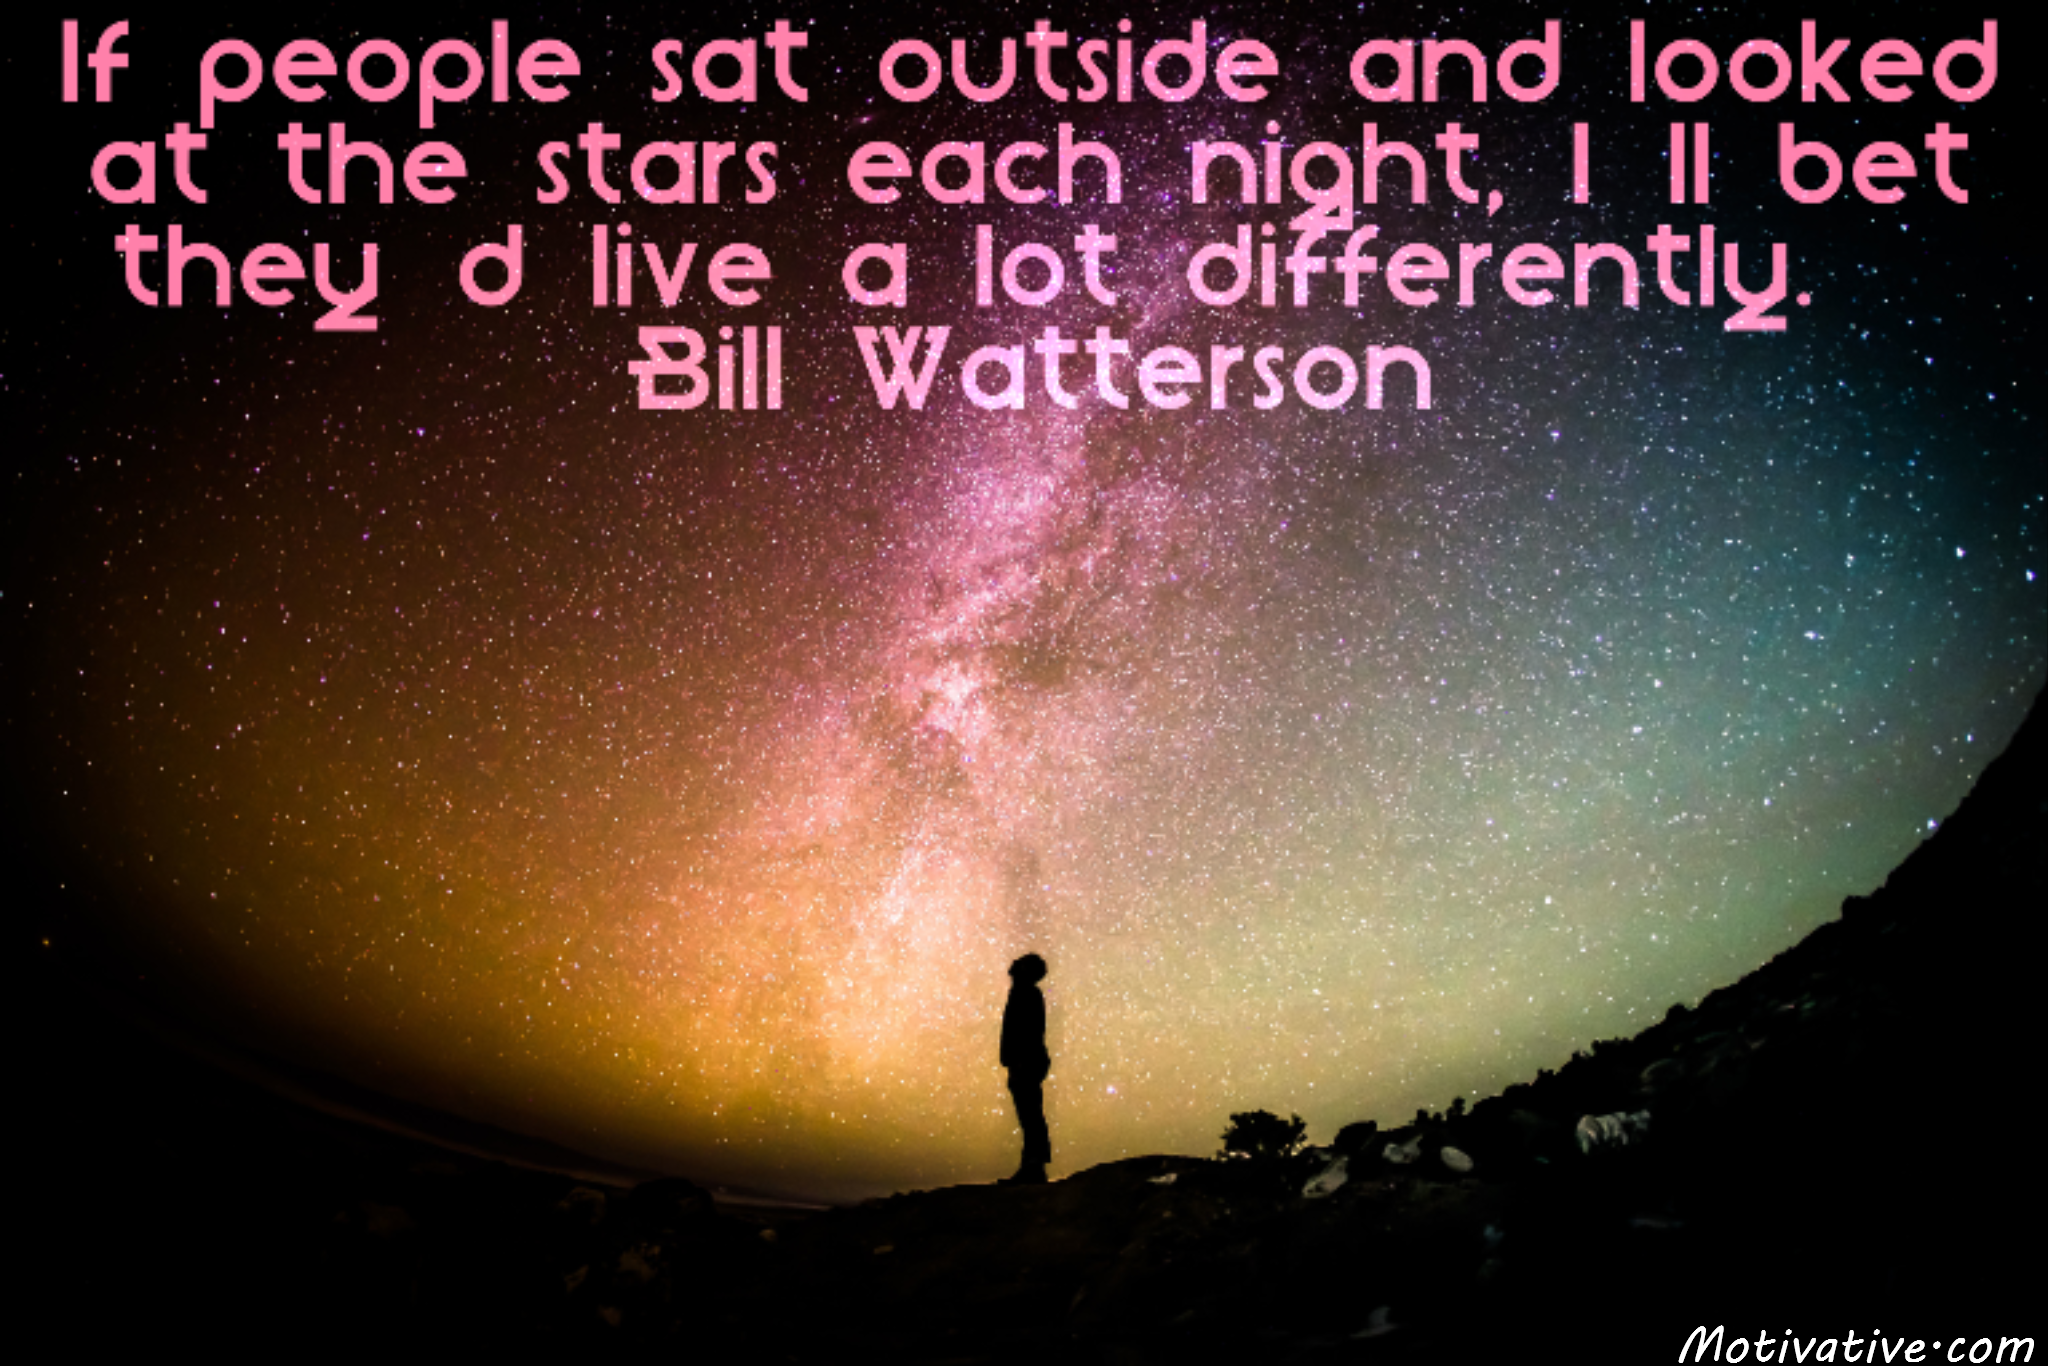 If people sat outside and looked at the stars each night, I’ll bet they’d live a lot differently. – Bill Watterson